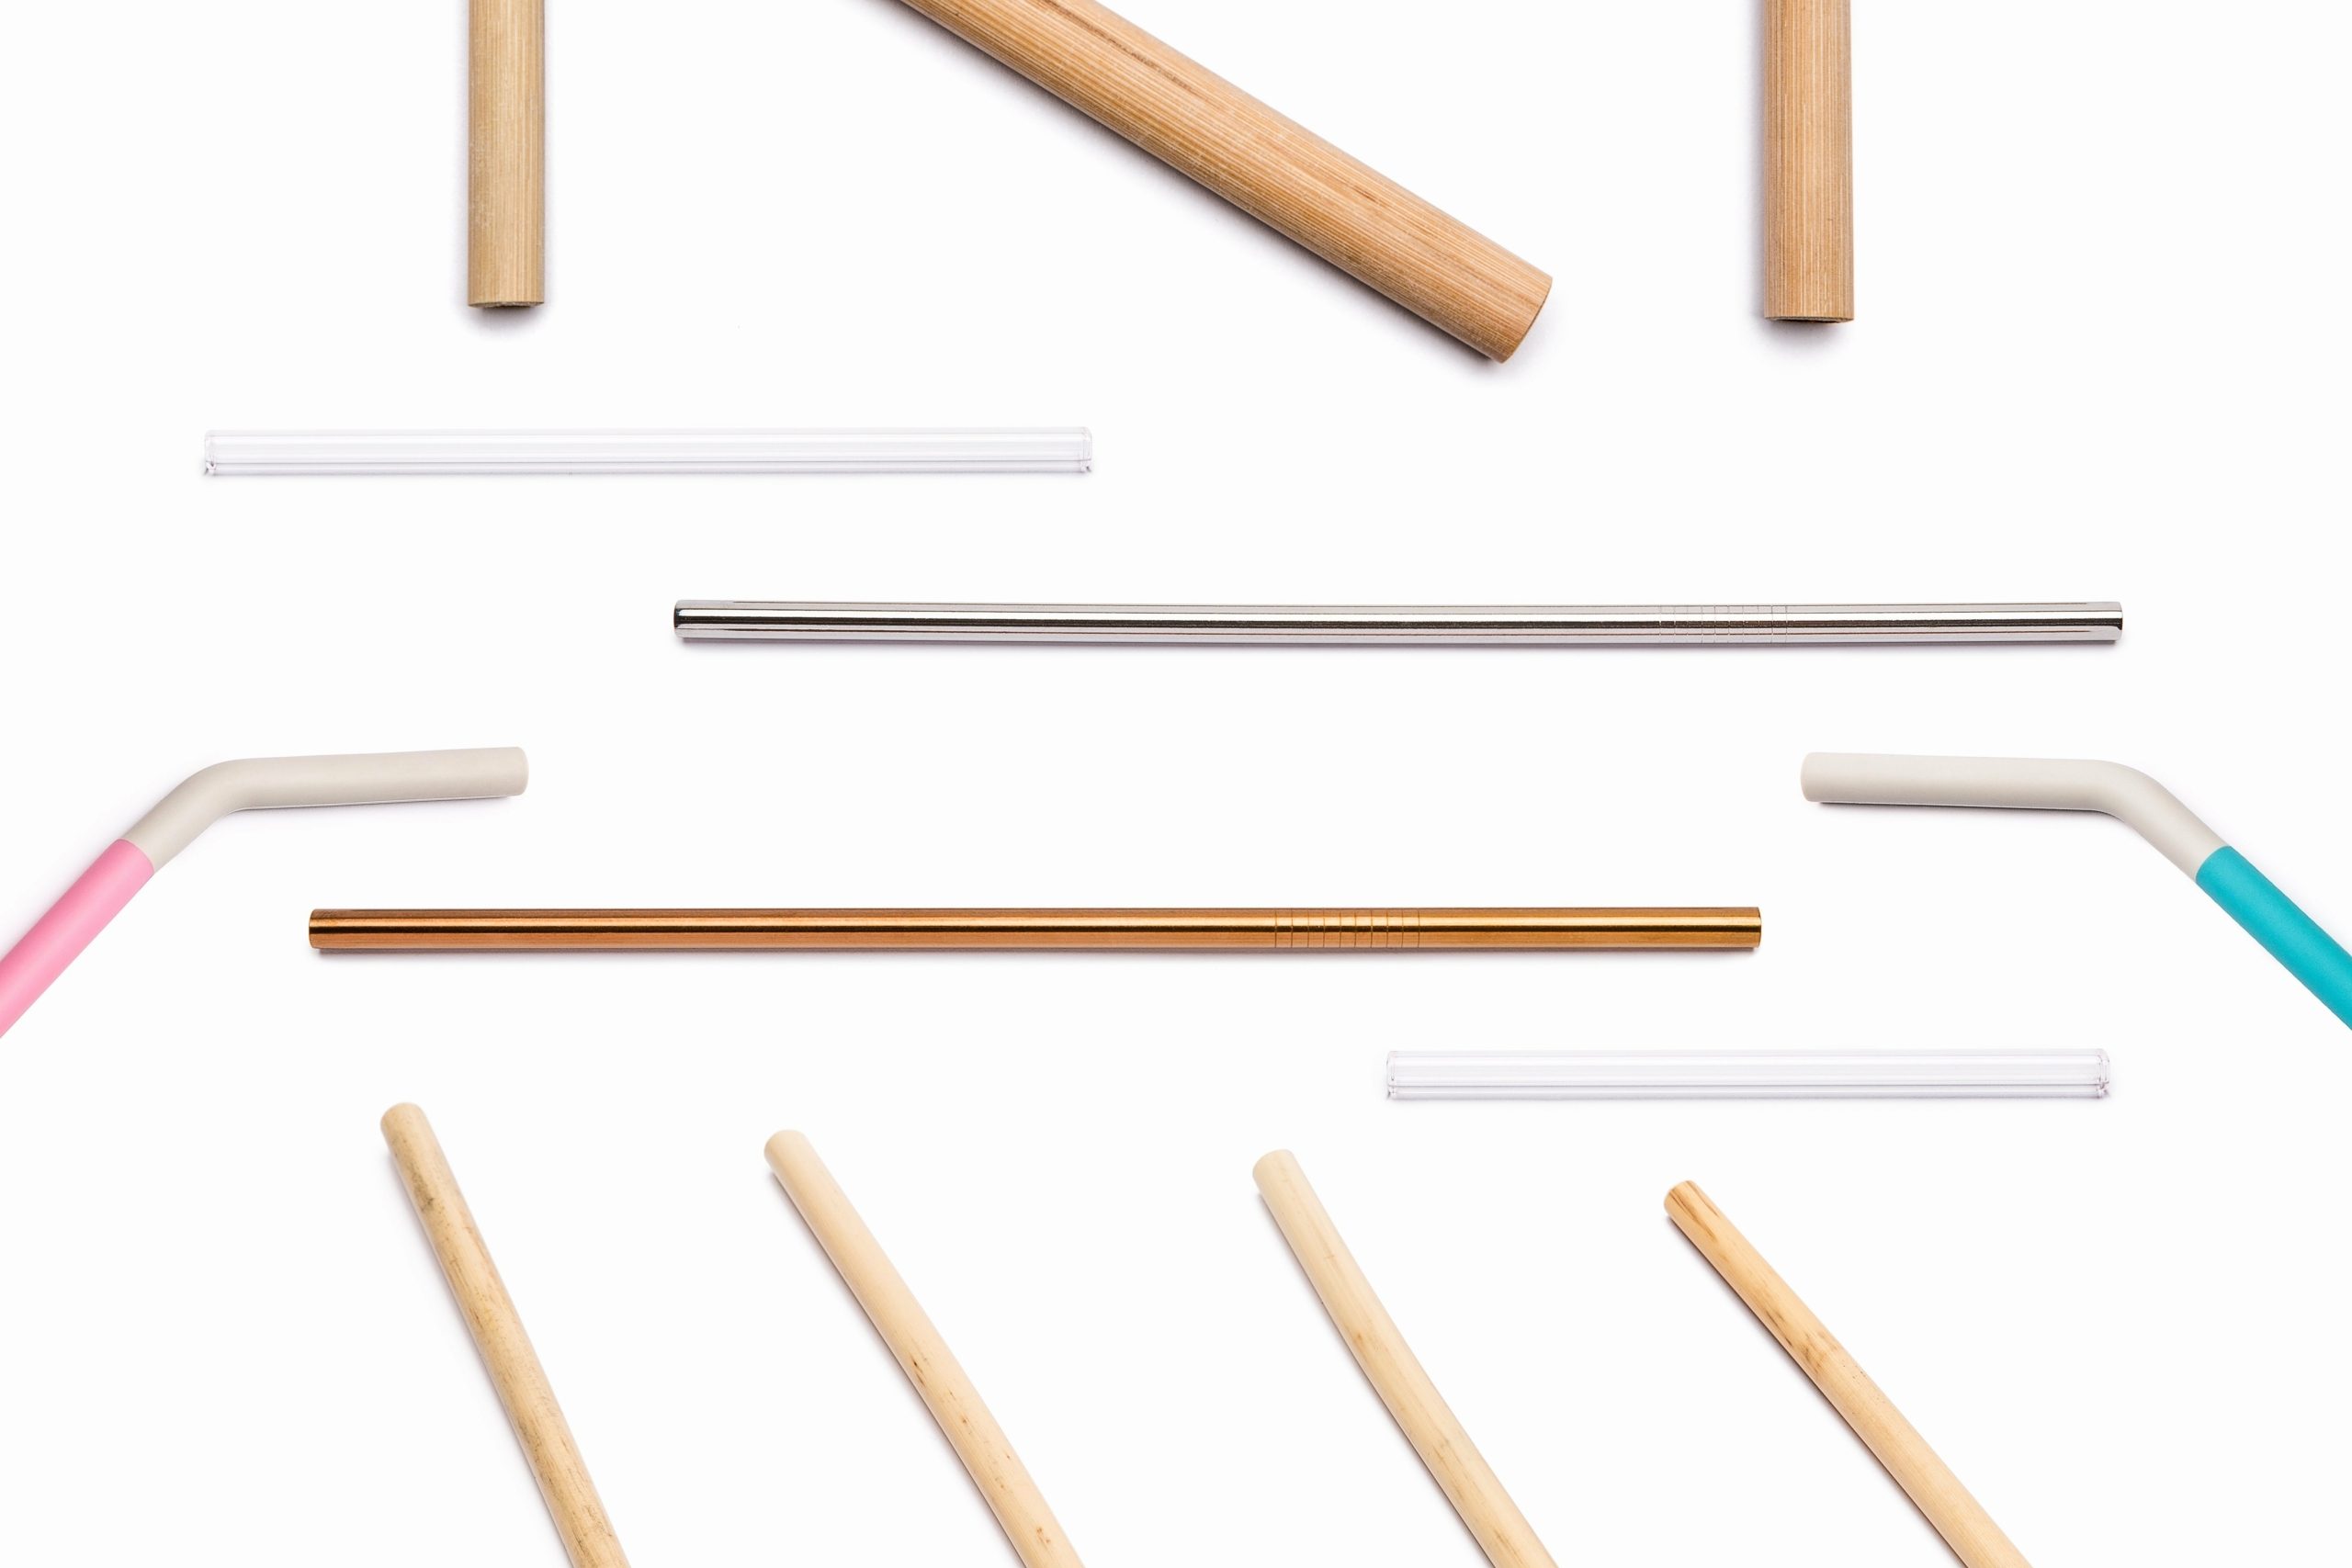 https://drinking-straw.com/wp-content/uploads/2019/10/Reusable-Straws-scaled.jpg